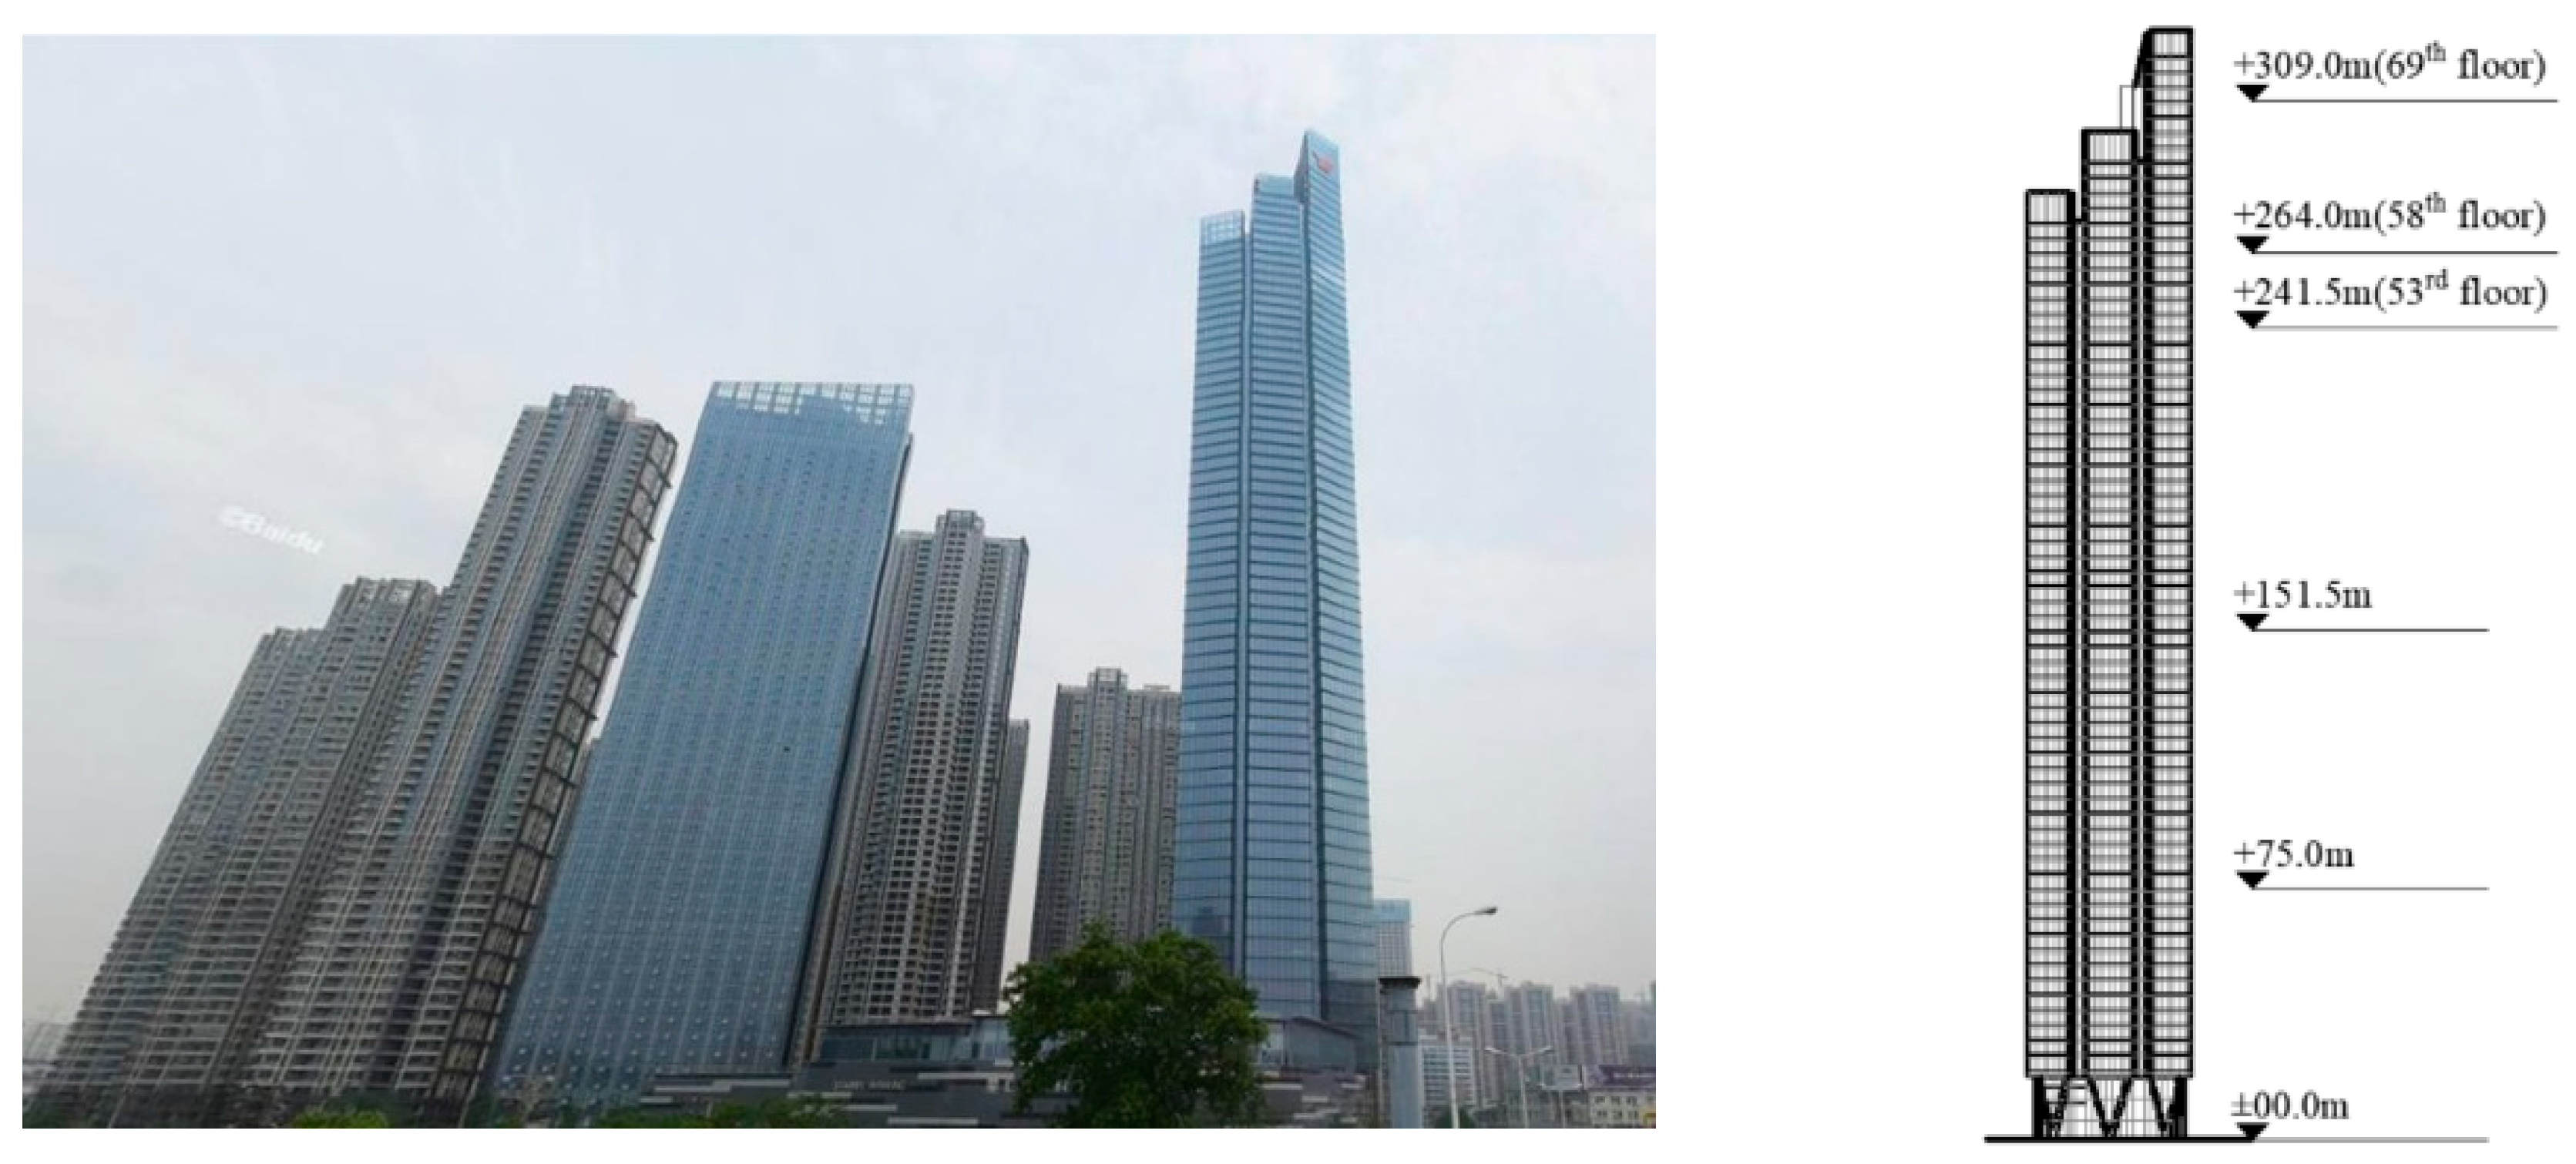 How to Model and Design High Rise Buildings using ETABS.pdf